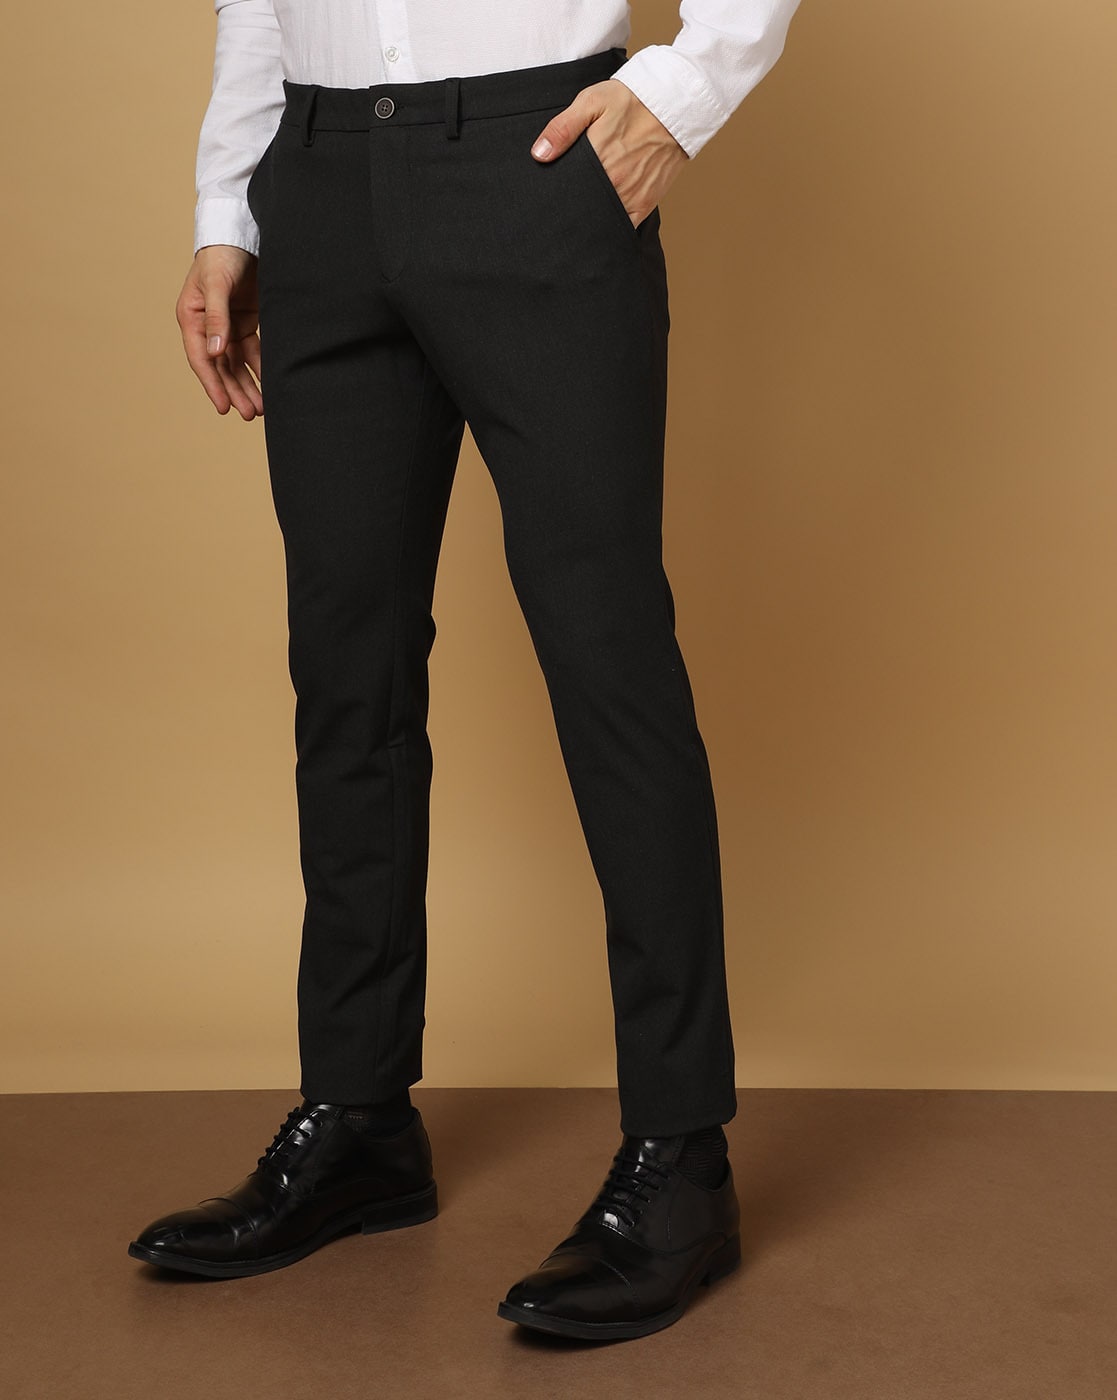 Made In India Curvature Formal Wear Regular Fit Cotton Trousers For Mens  Waist Size 28 To 38 at Best Price in Kolkata  Kaaparsik International